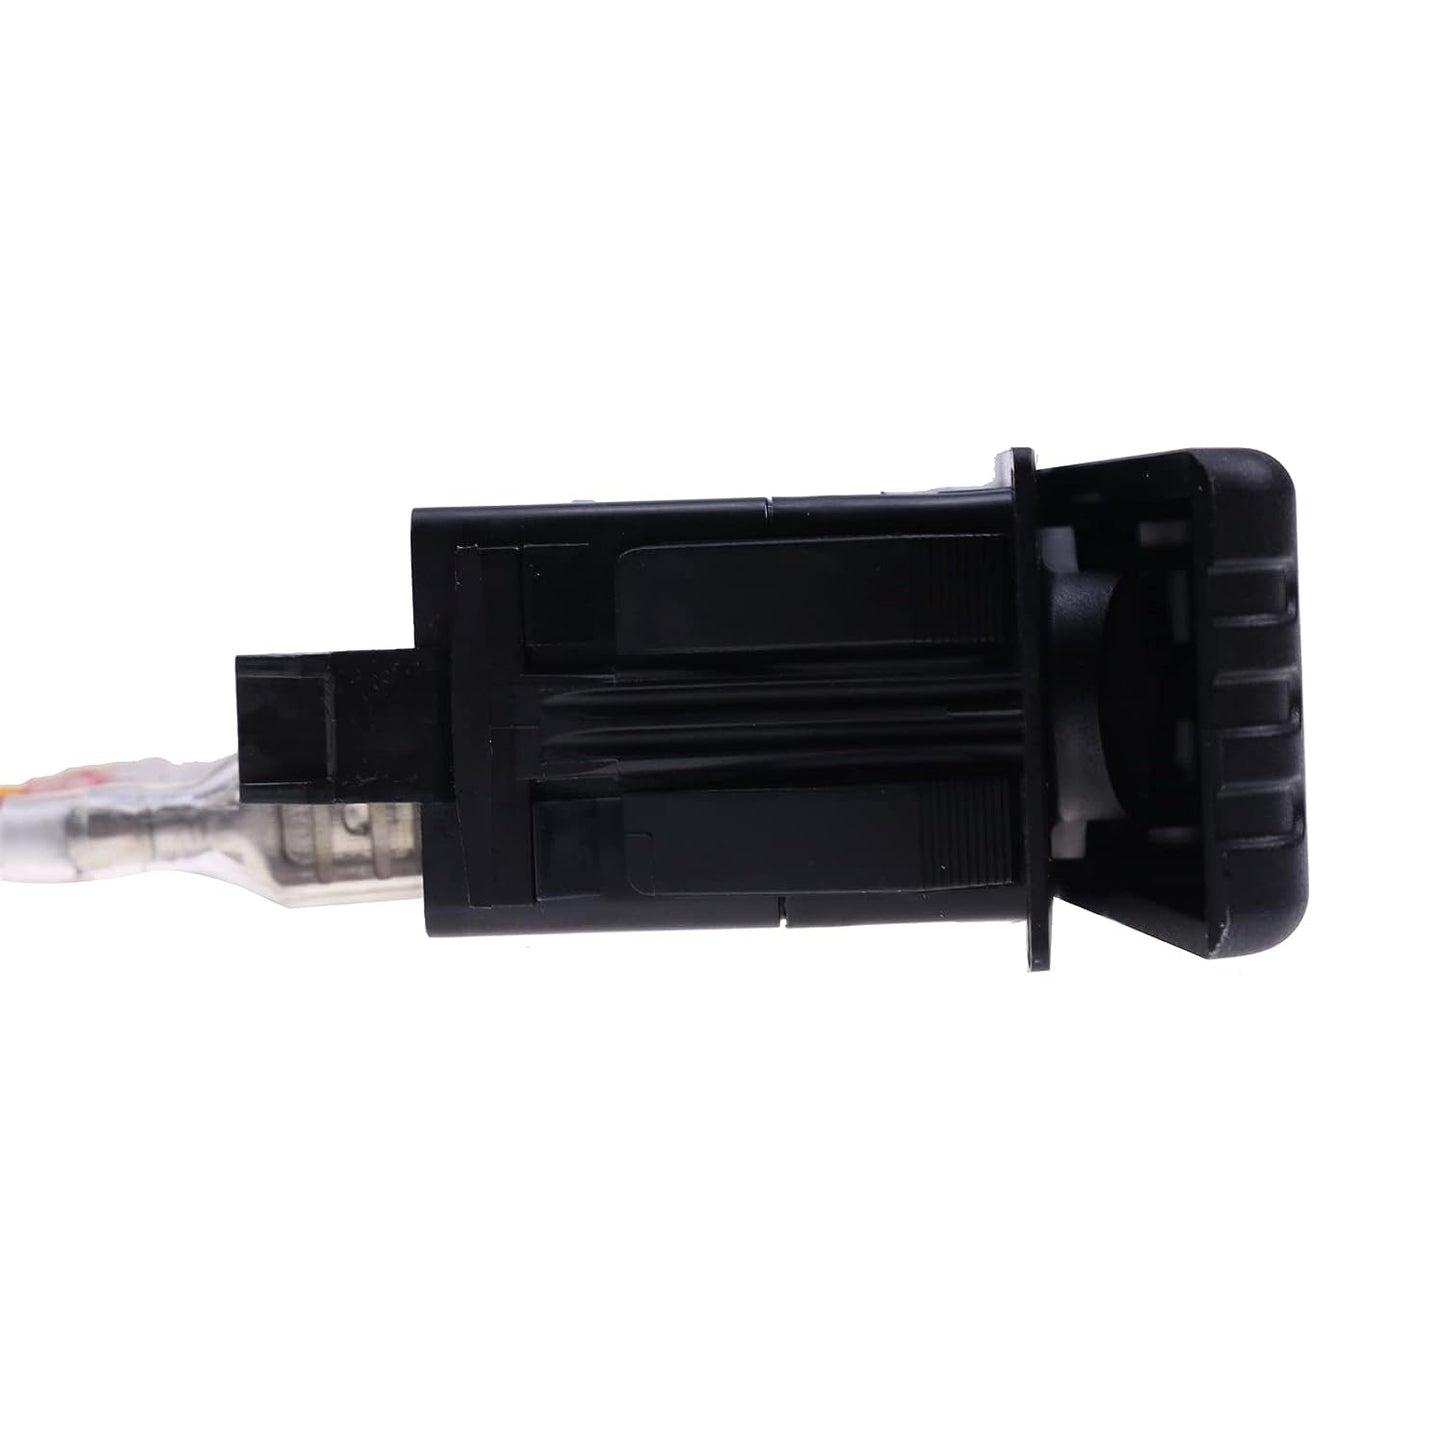 JR1-H2917-10 Forward Reverse Switch Compatible With 1996-2004 Yamaha G19 G22 Golf Carts